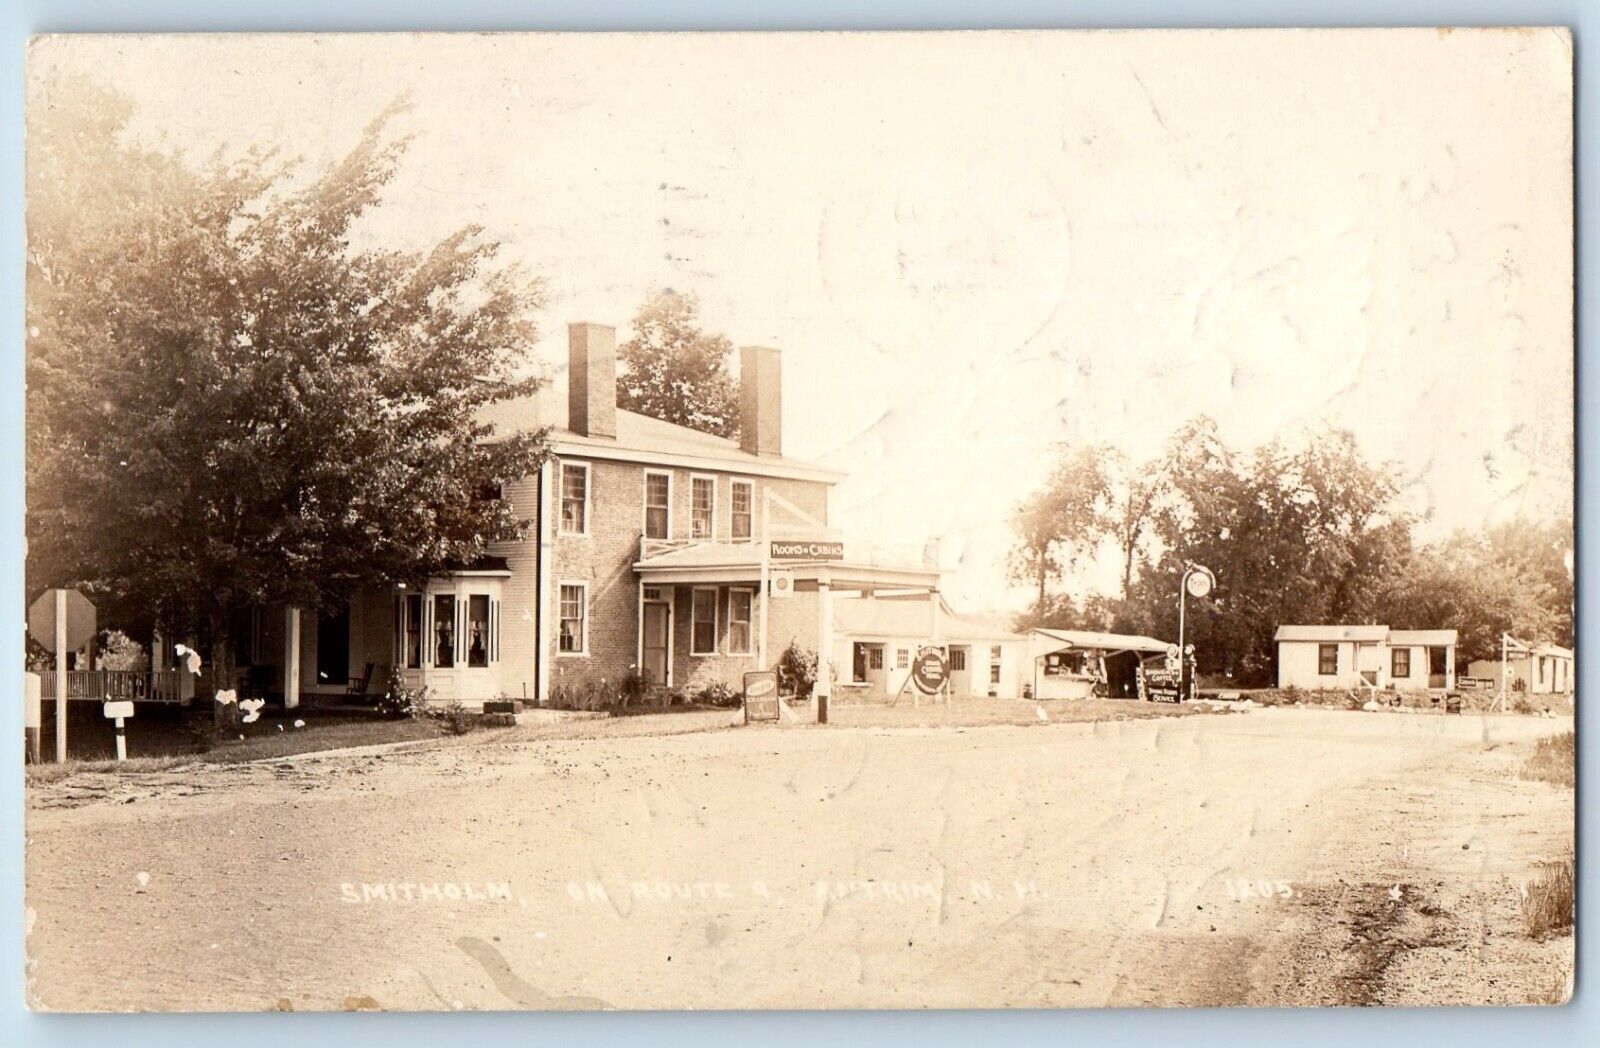 Antrim New Hampshire NH Postcard RPPC Photo Smitholm Rooms And Cabin Gas Station